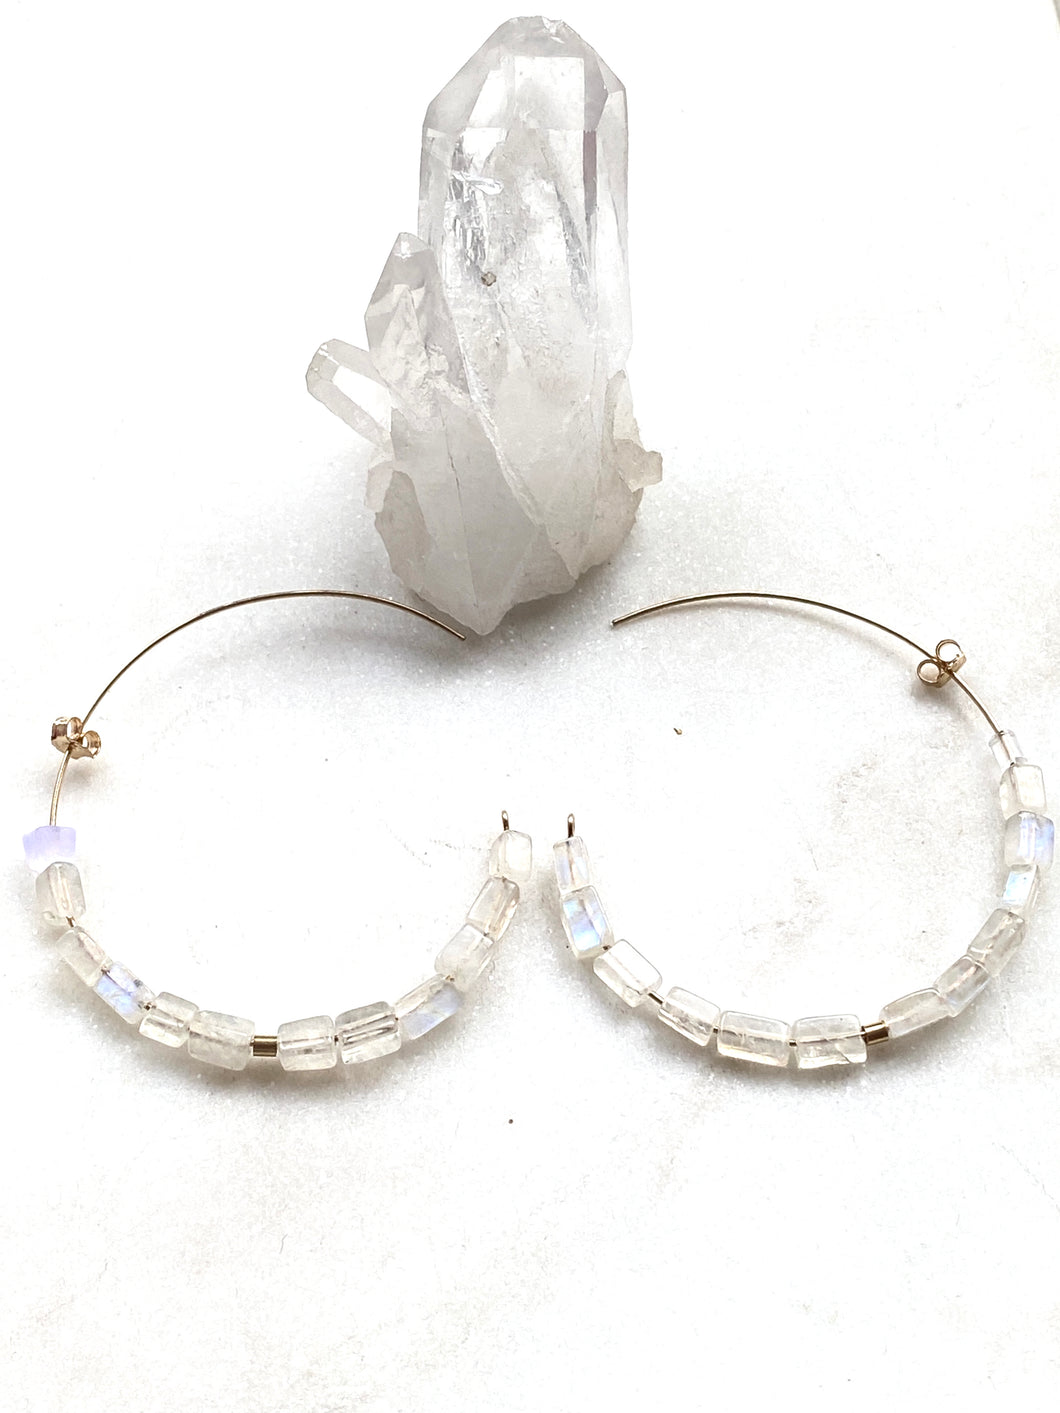 Moonstone Goldfilled Earrings Hoops. with Goldfilled spacers. Hand crafted by Full Moon Designs.